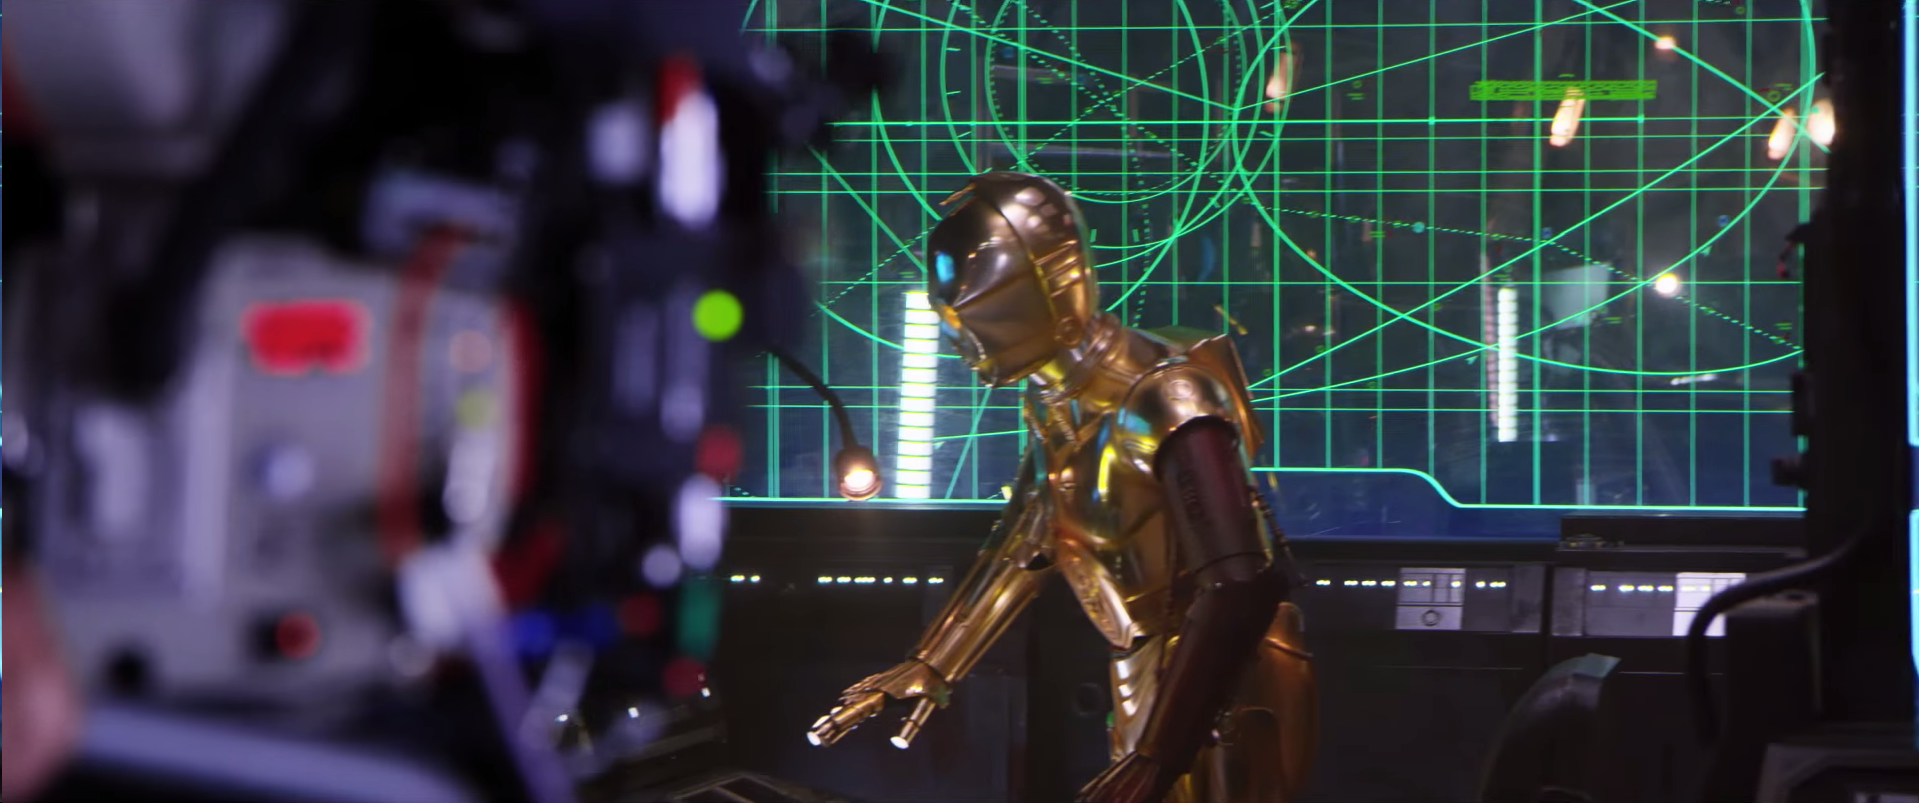 Star Wars: The Force Awakens Comic-Con Footage Analysis